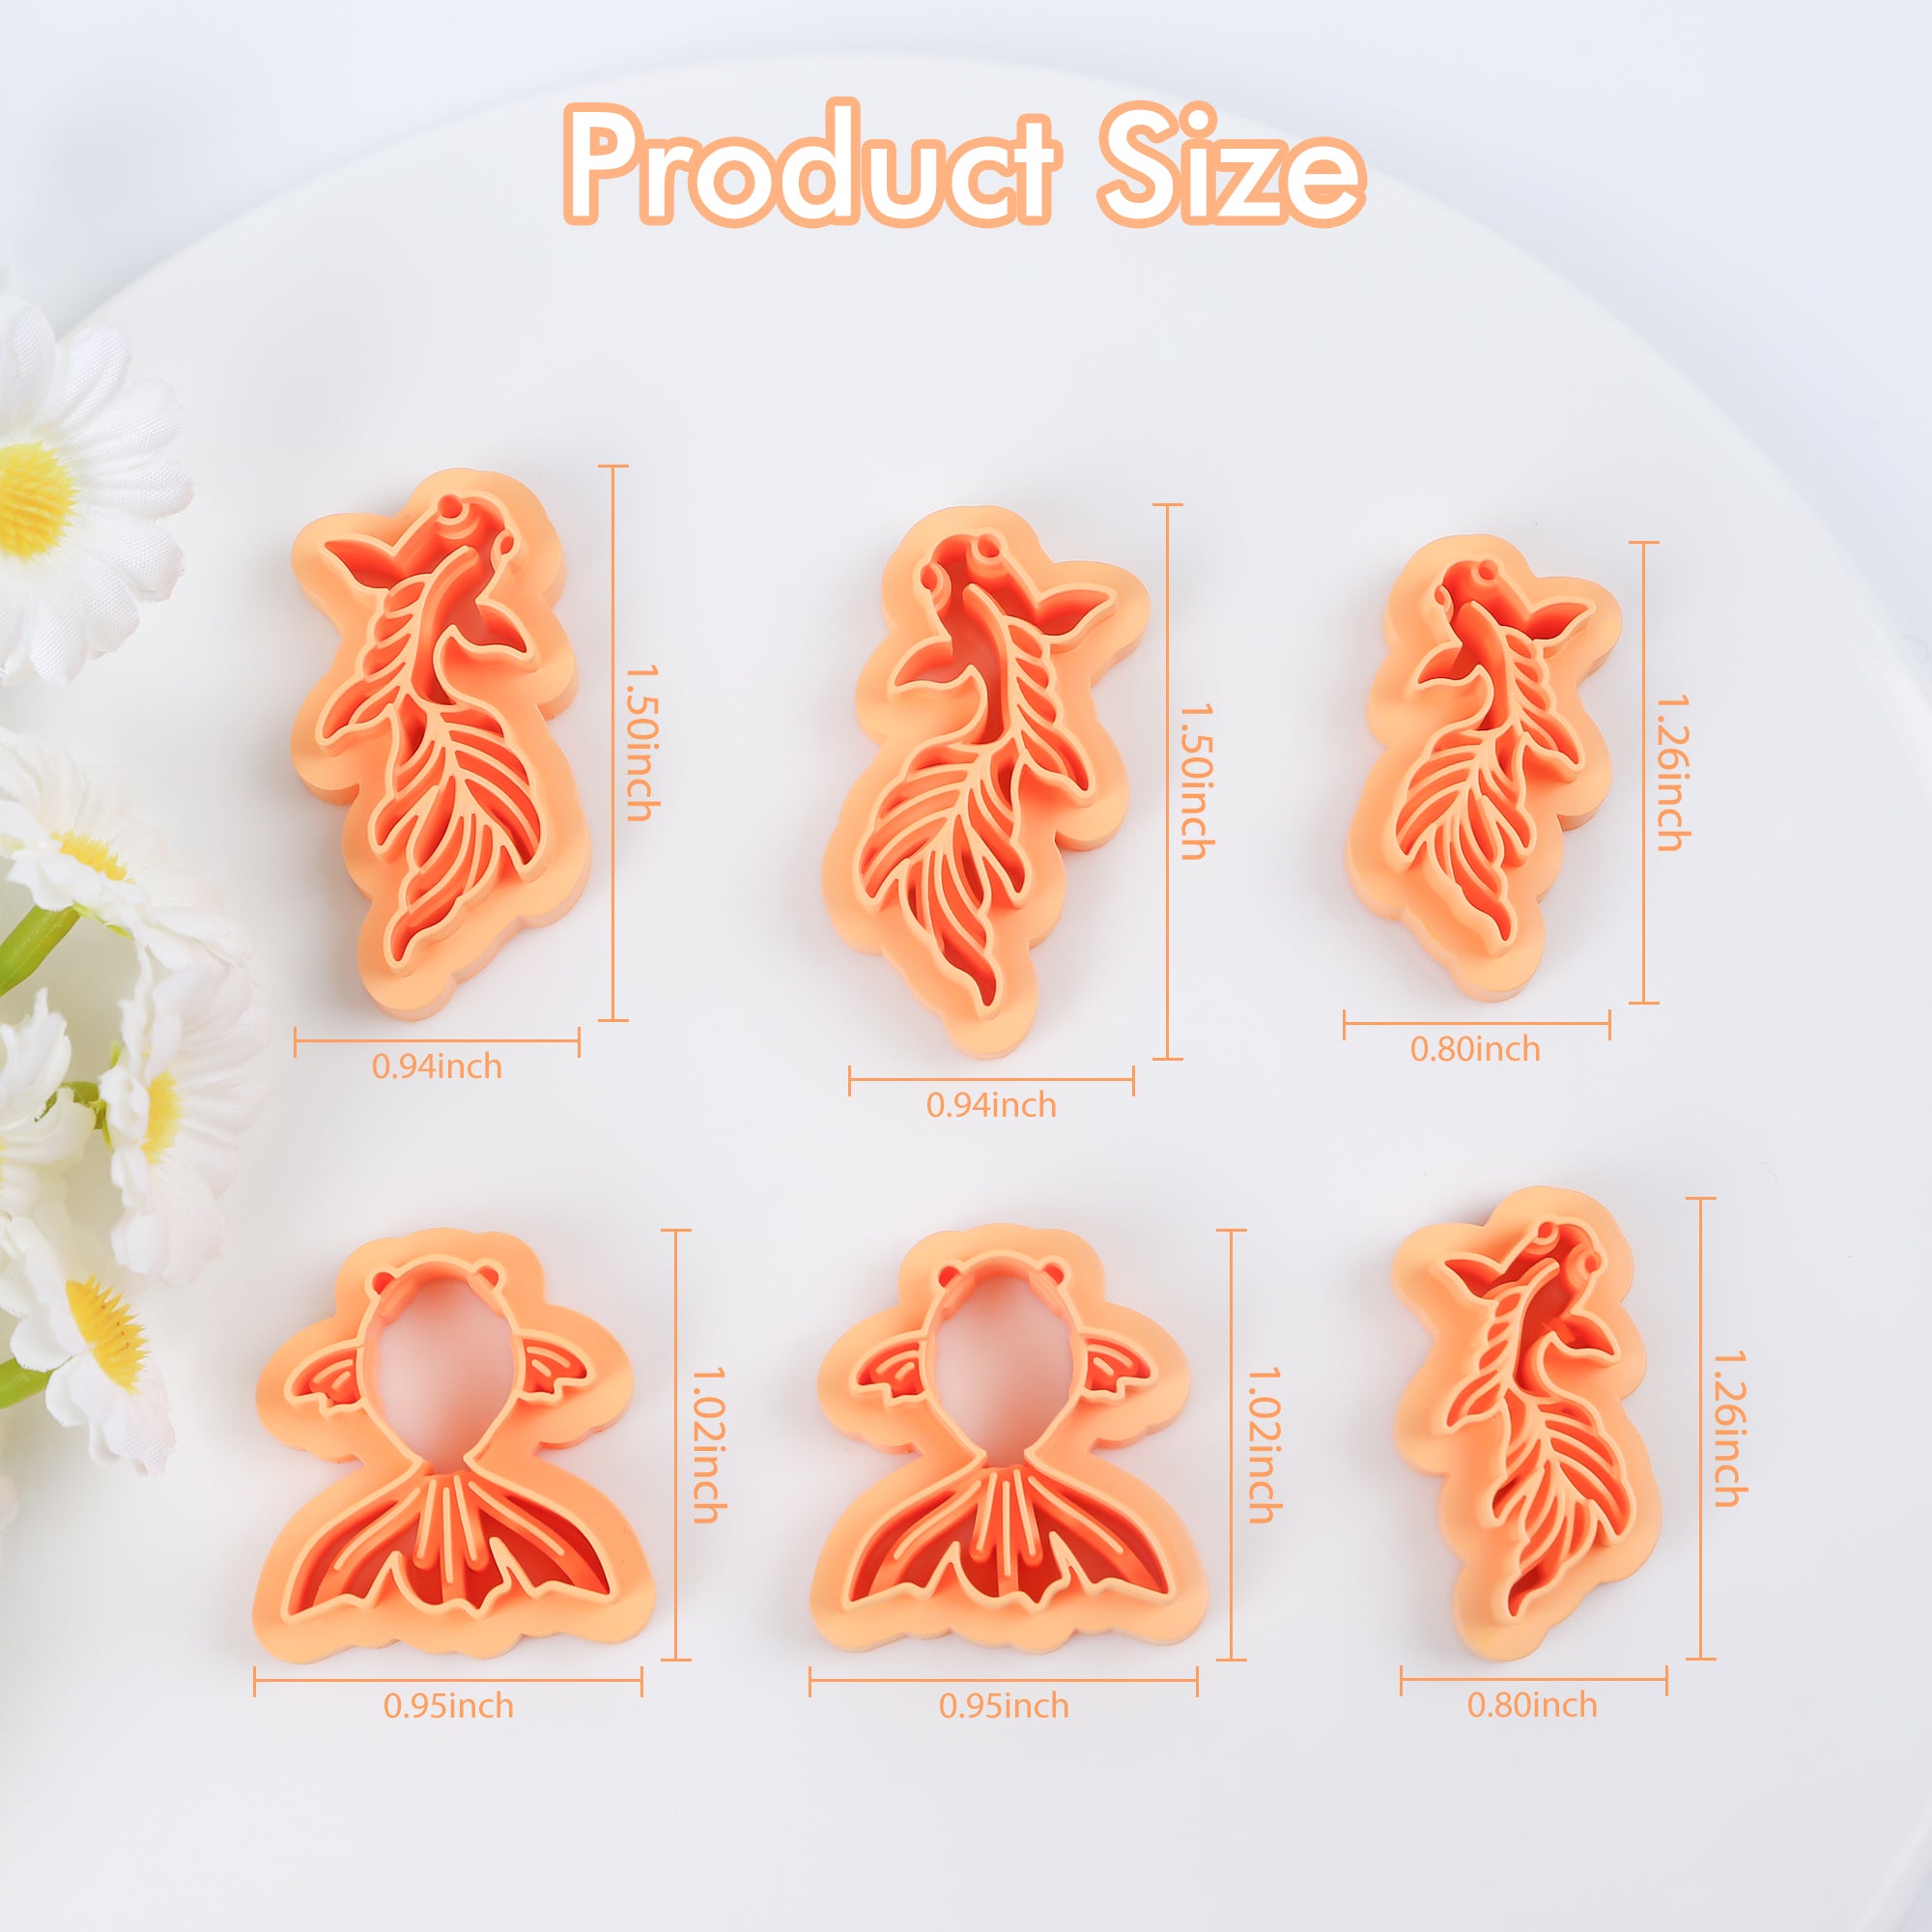 Puocaon Goldfish Polymer Clay Cutters 6 Pcs